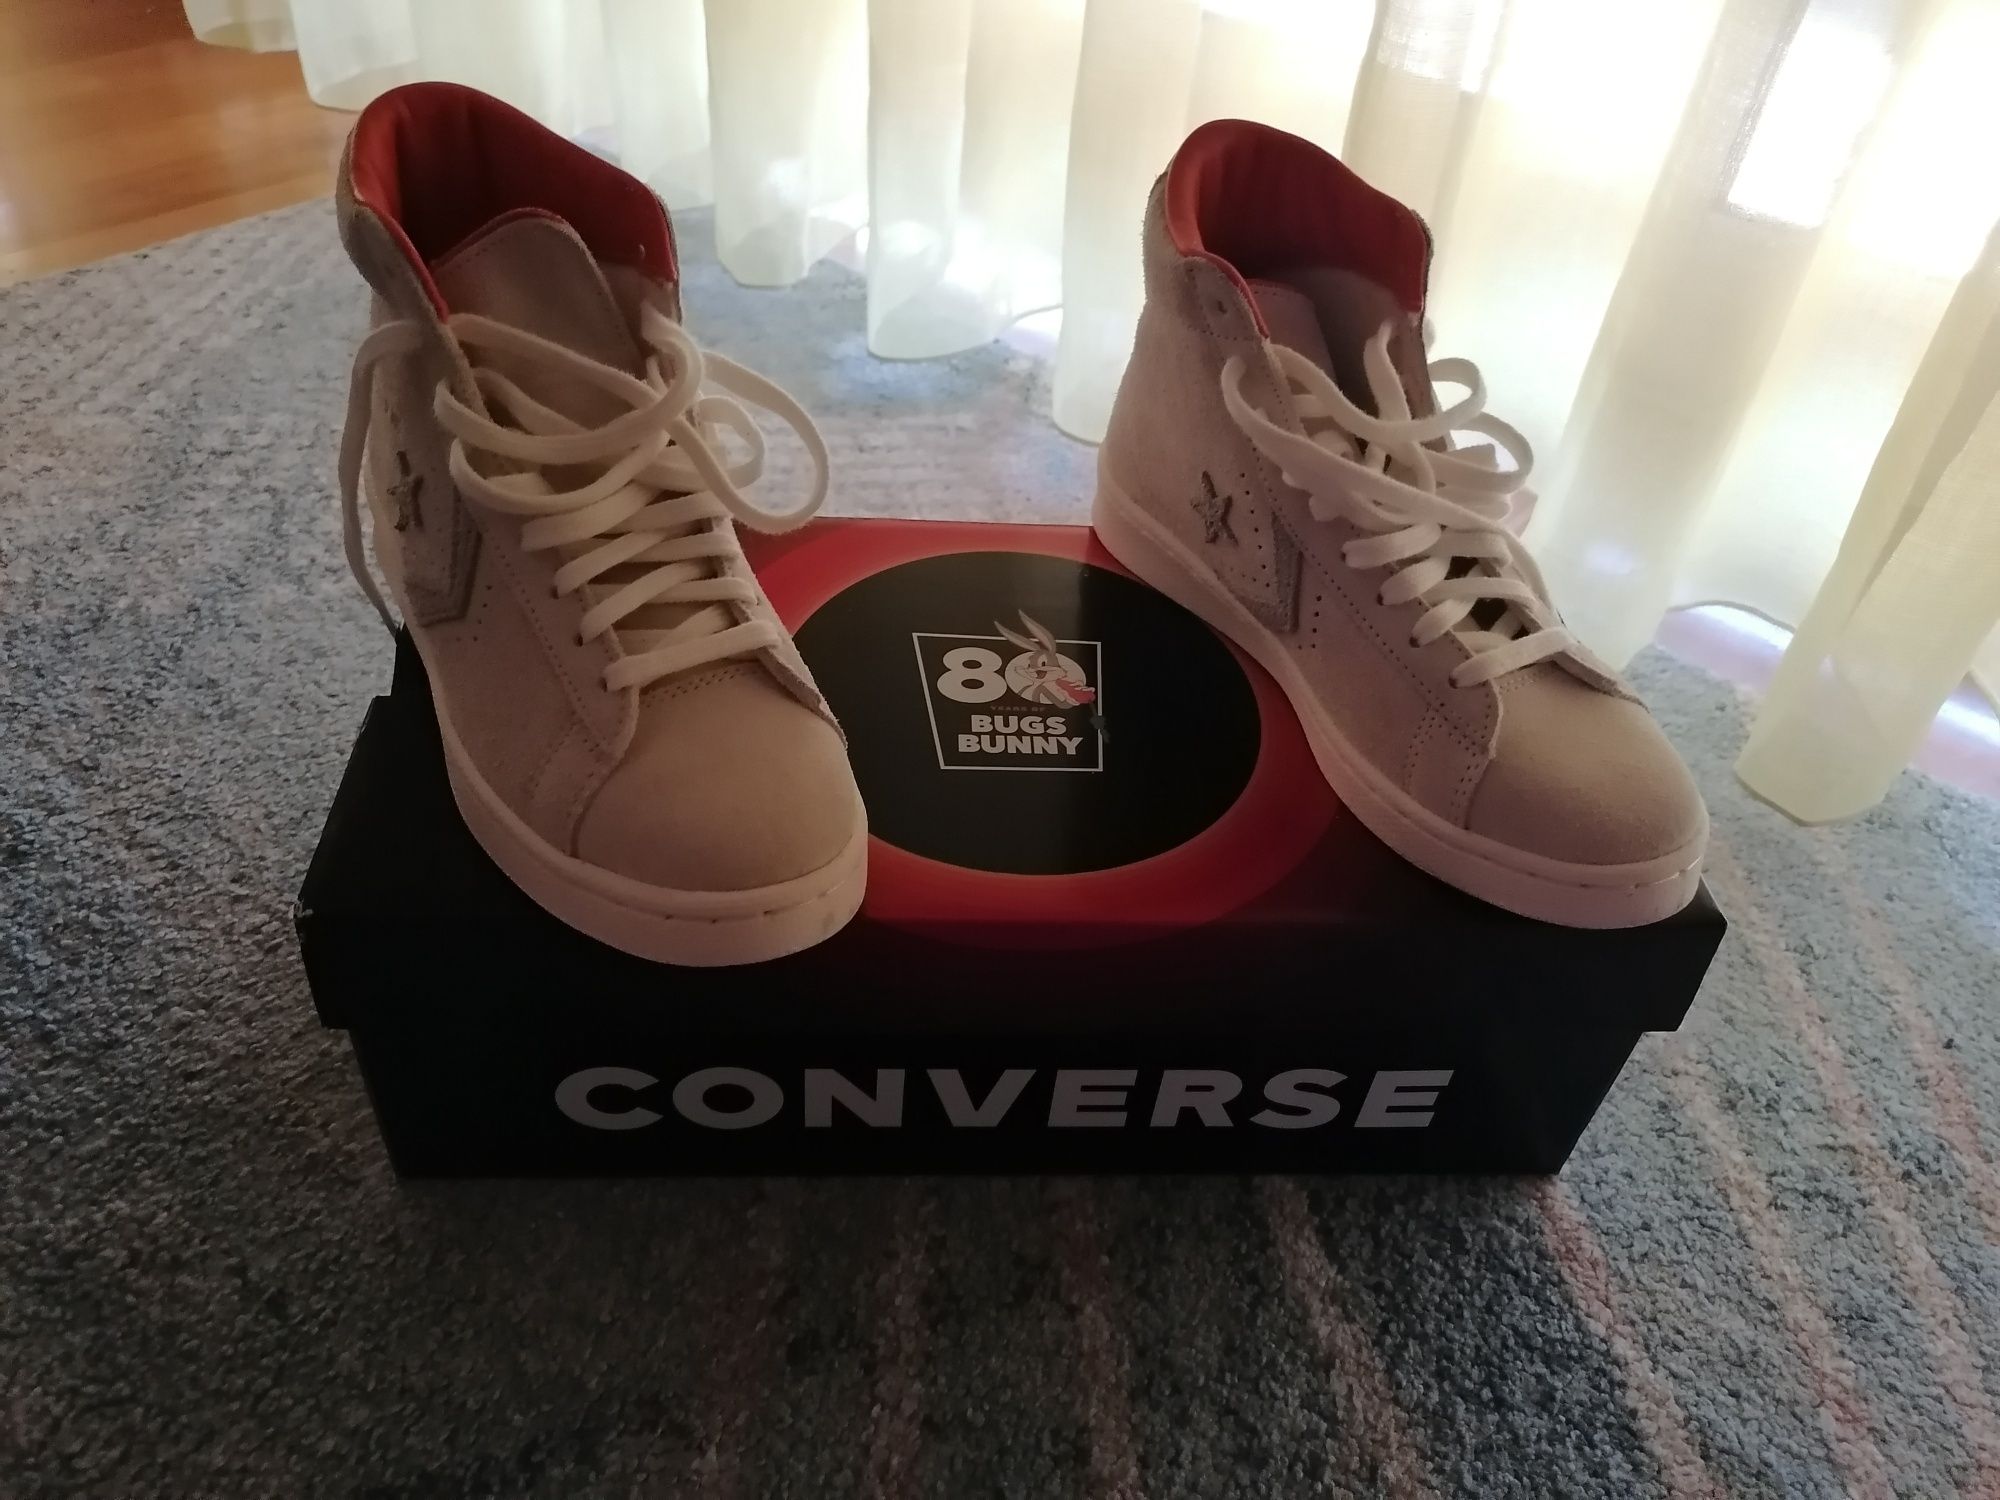 Converse all star limited edition's Bugs bunny 80 years of